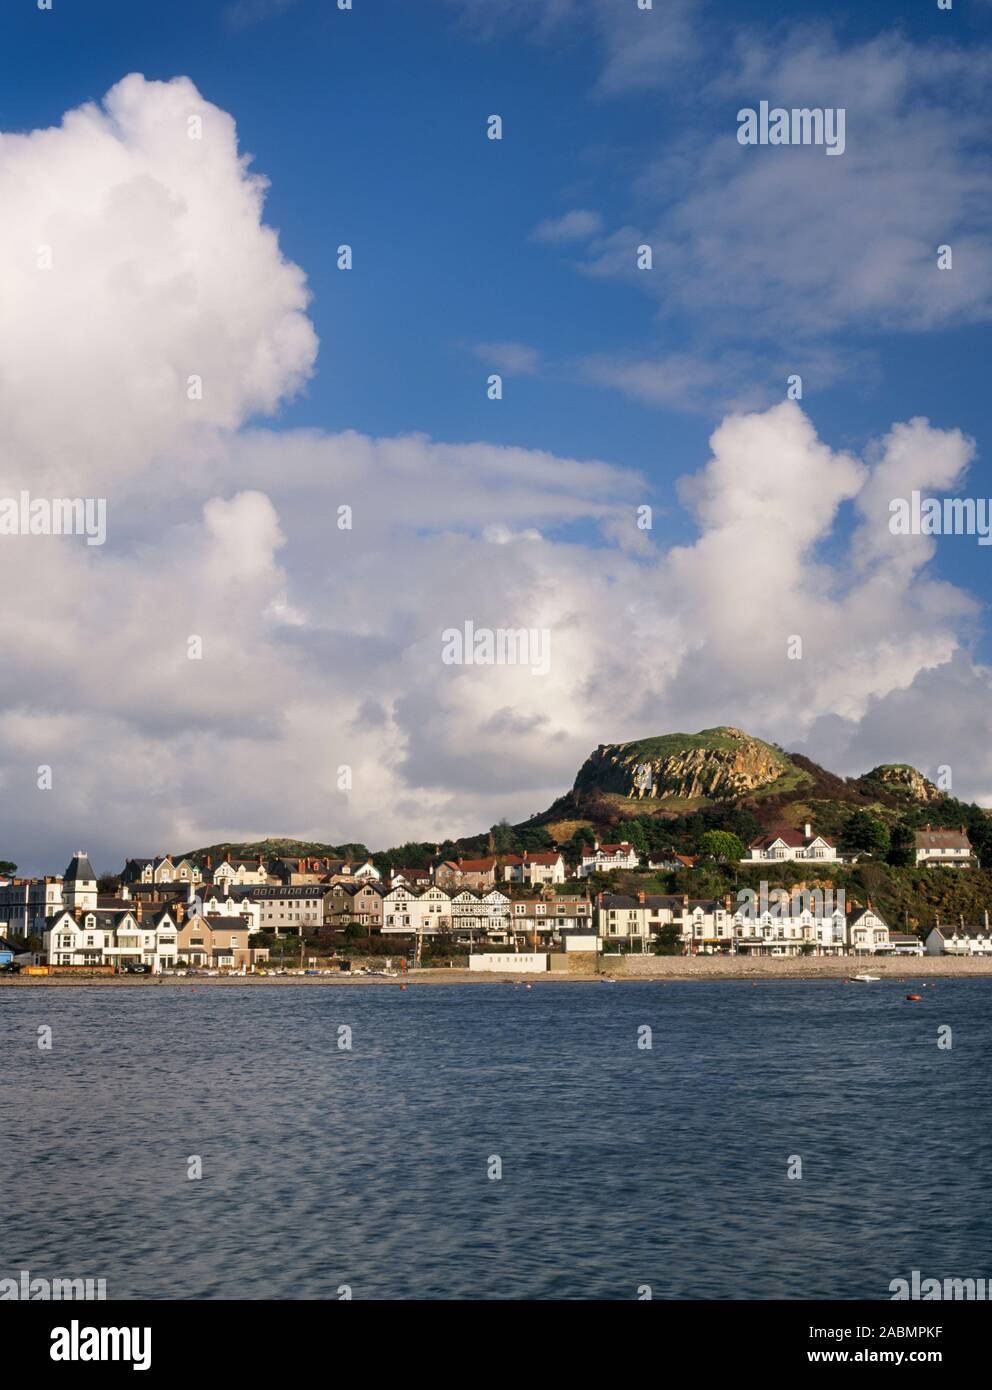 View NE from Conwy marina across the estuary to Deganwy town & the twin peaks of Deganwy Castle (Castell Degannwy), North Wales, UK. Stock Photo